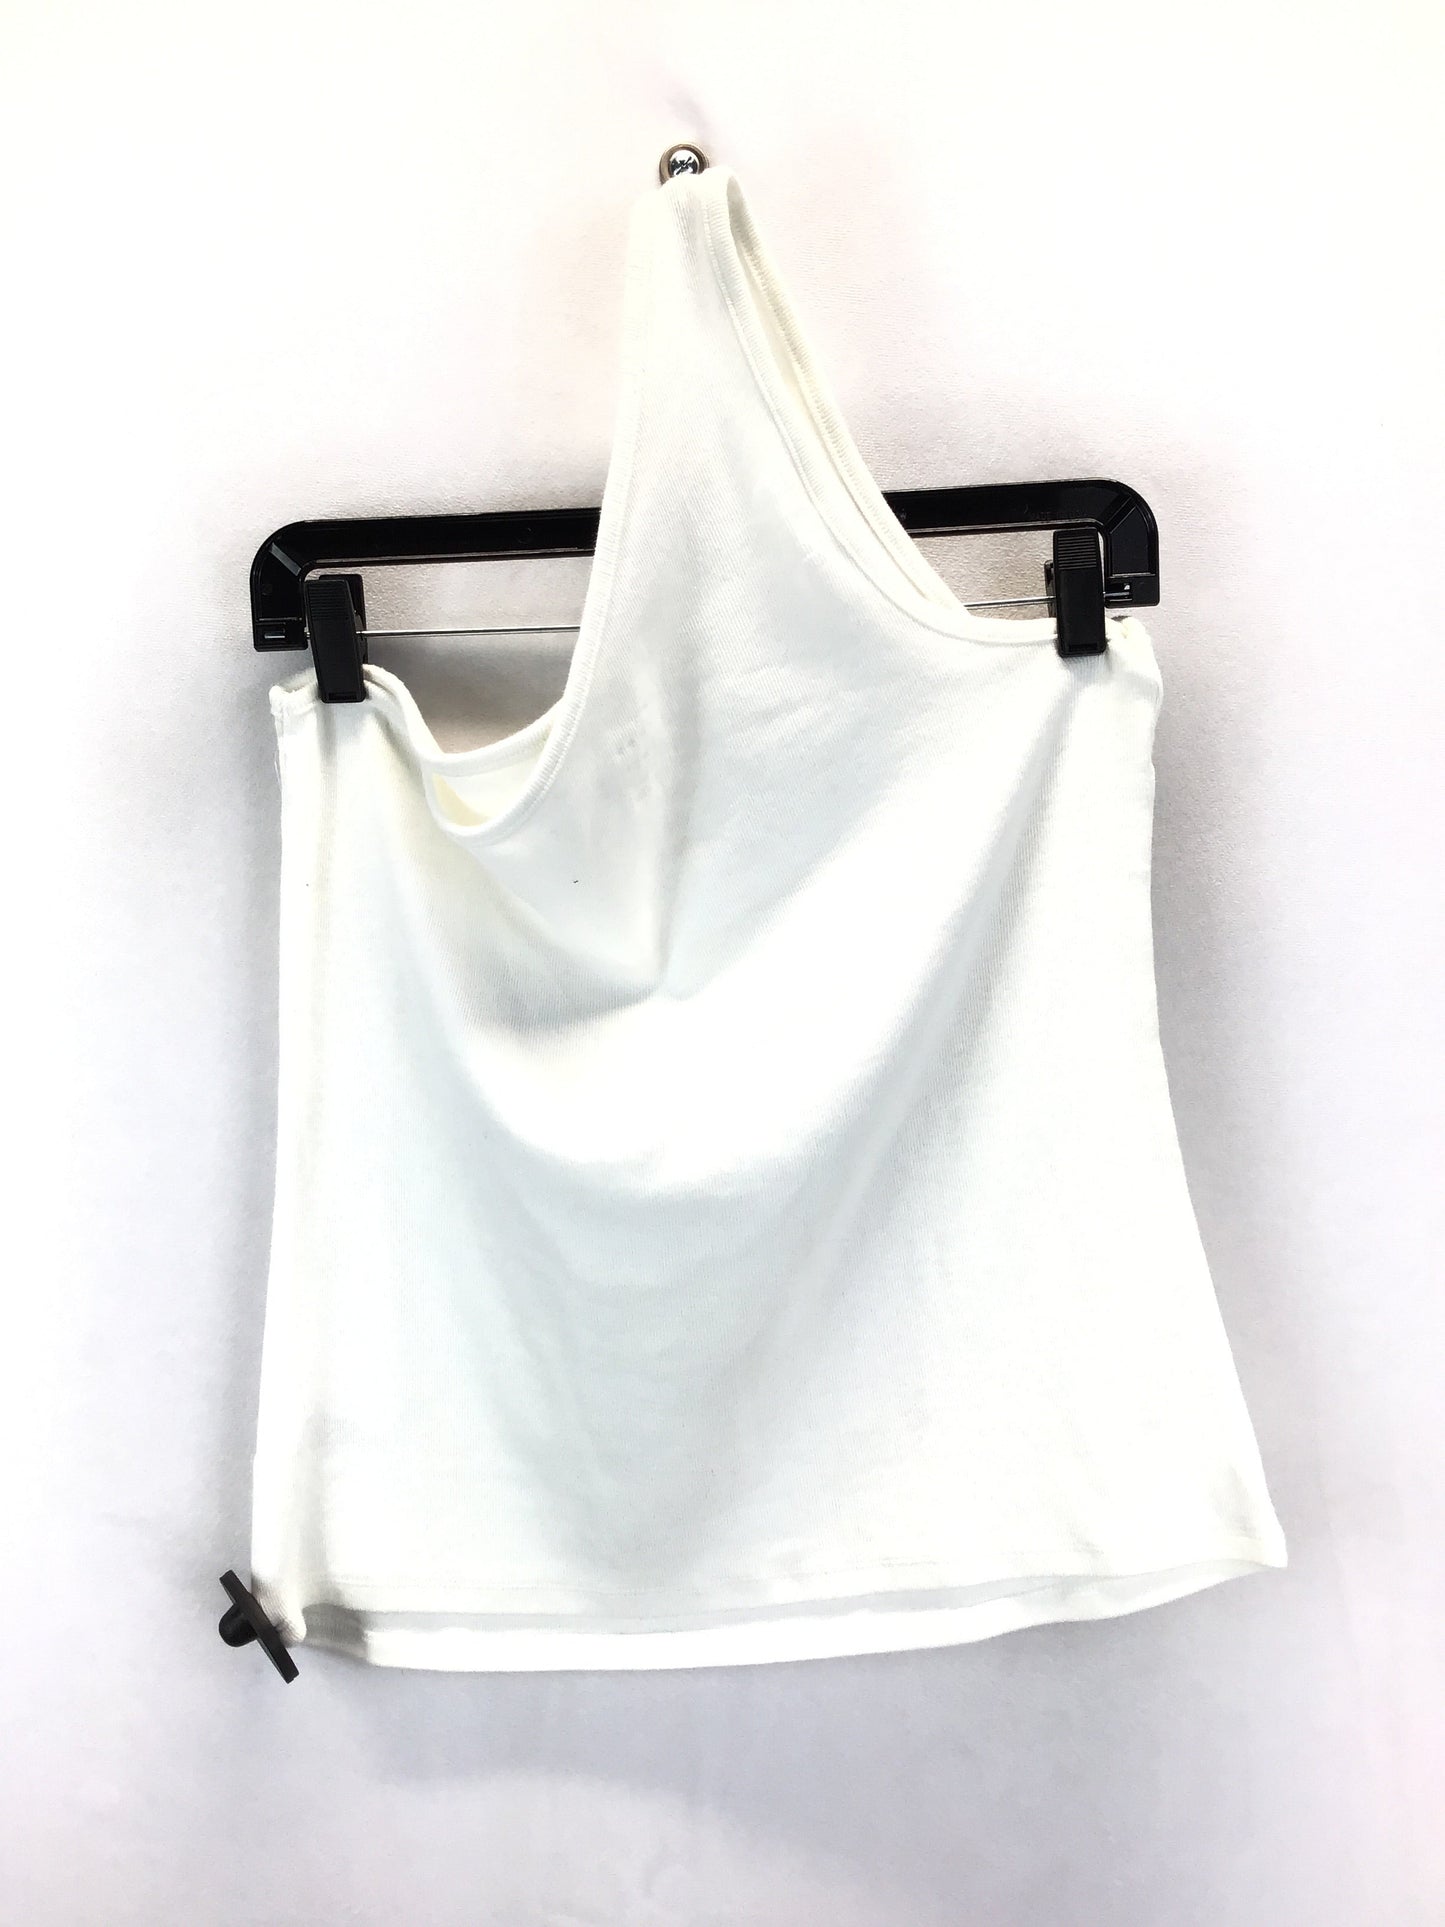 Top Sleeveless Basic By A New Day  Size: Xxl